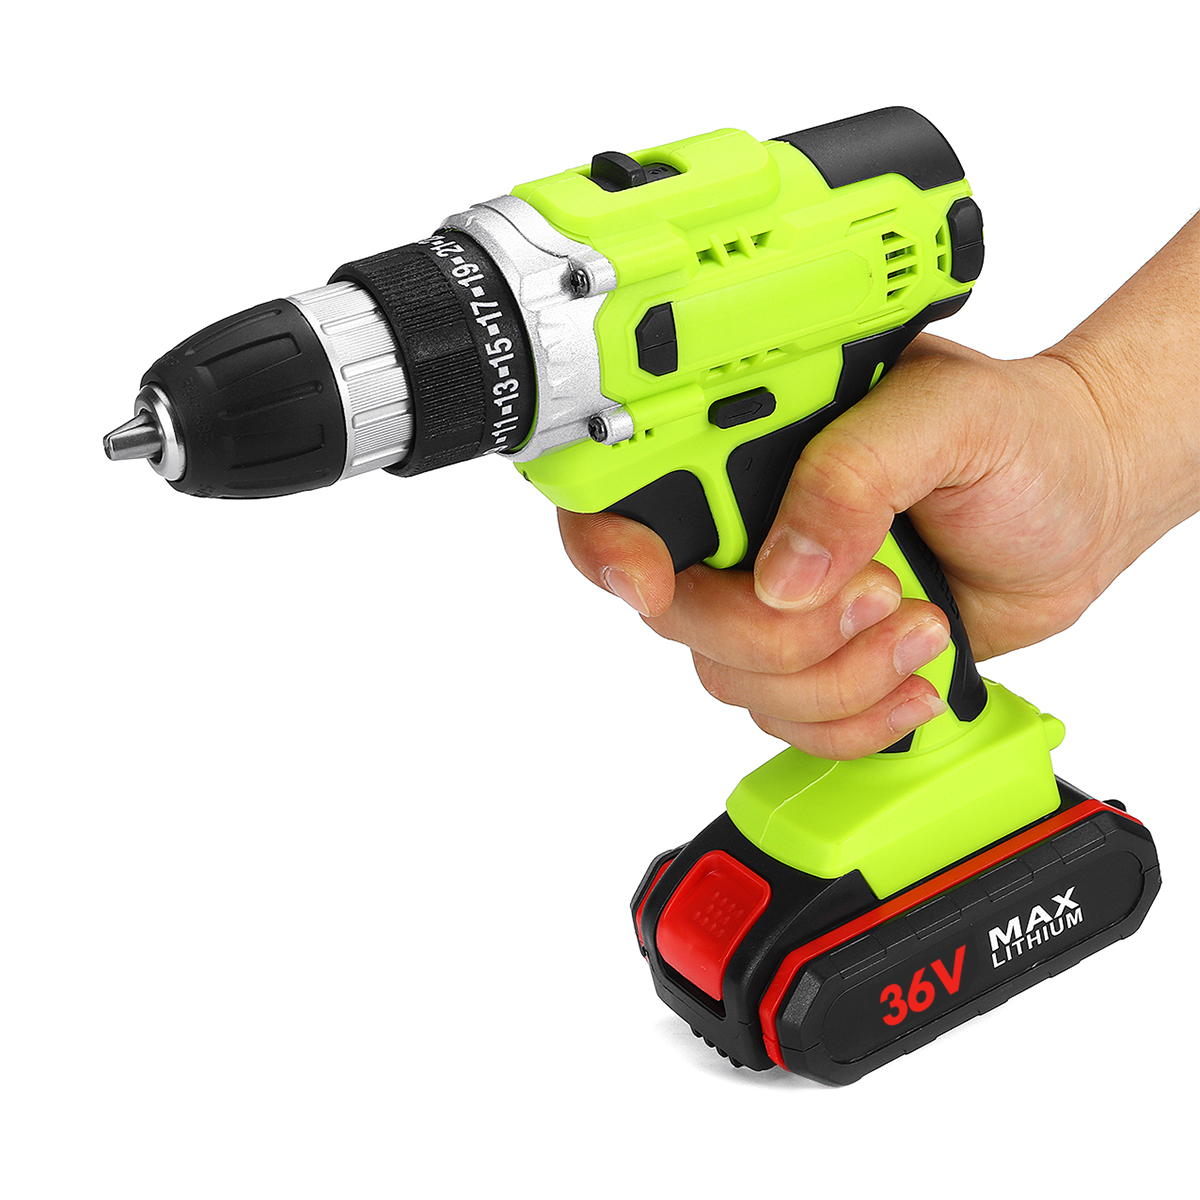 38-Inch-UK-Plug-Multifunctional-Cordless-Drill-Chuck-Impact-Drilling-Tool-Electric-Drill-1943466-16